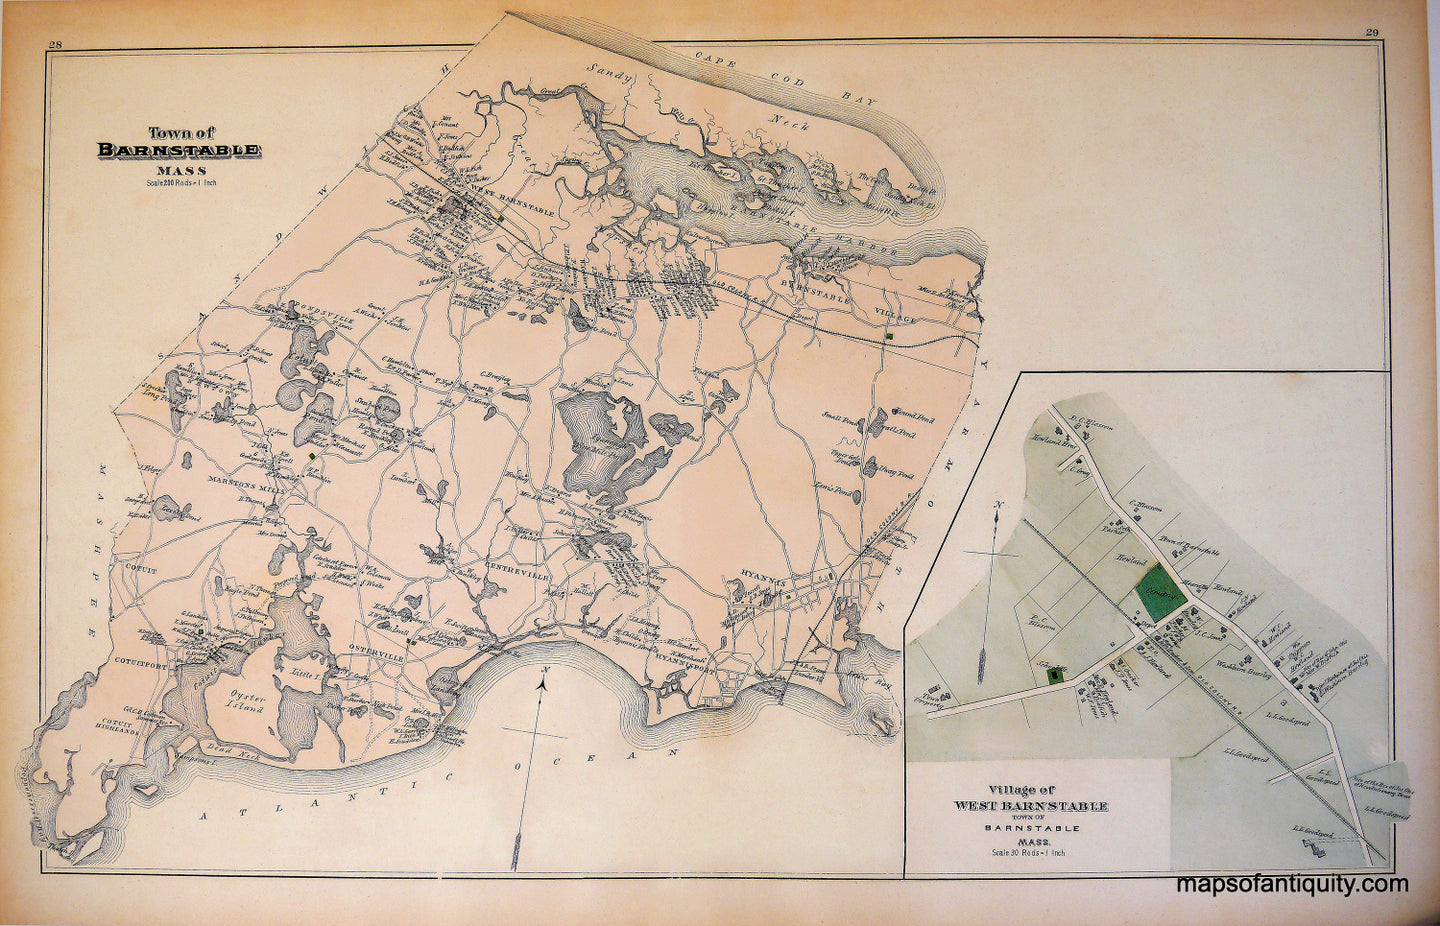 Reproduction-Town-of-Barnstable-West-Barnstable-pp.-28-29-Town-and-Village-Maps-Atlas-of-Barnstable-County-Walker-1880.---Reproduction---Reproductions-Cape-Cod-and-Islands-Reproduction--Maps-Of-Antiquity